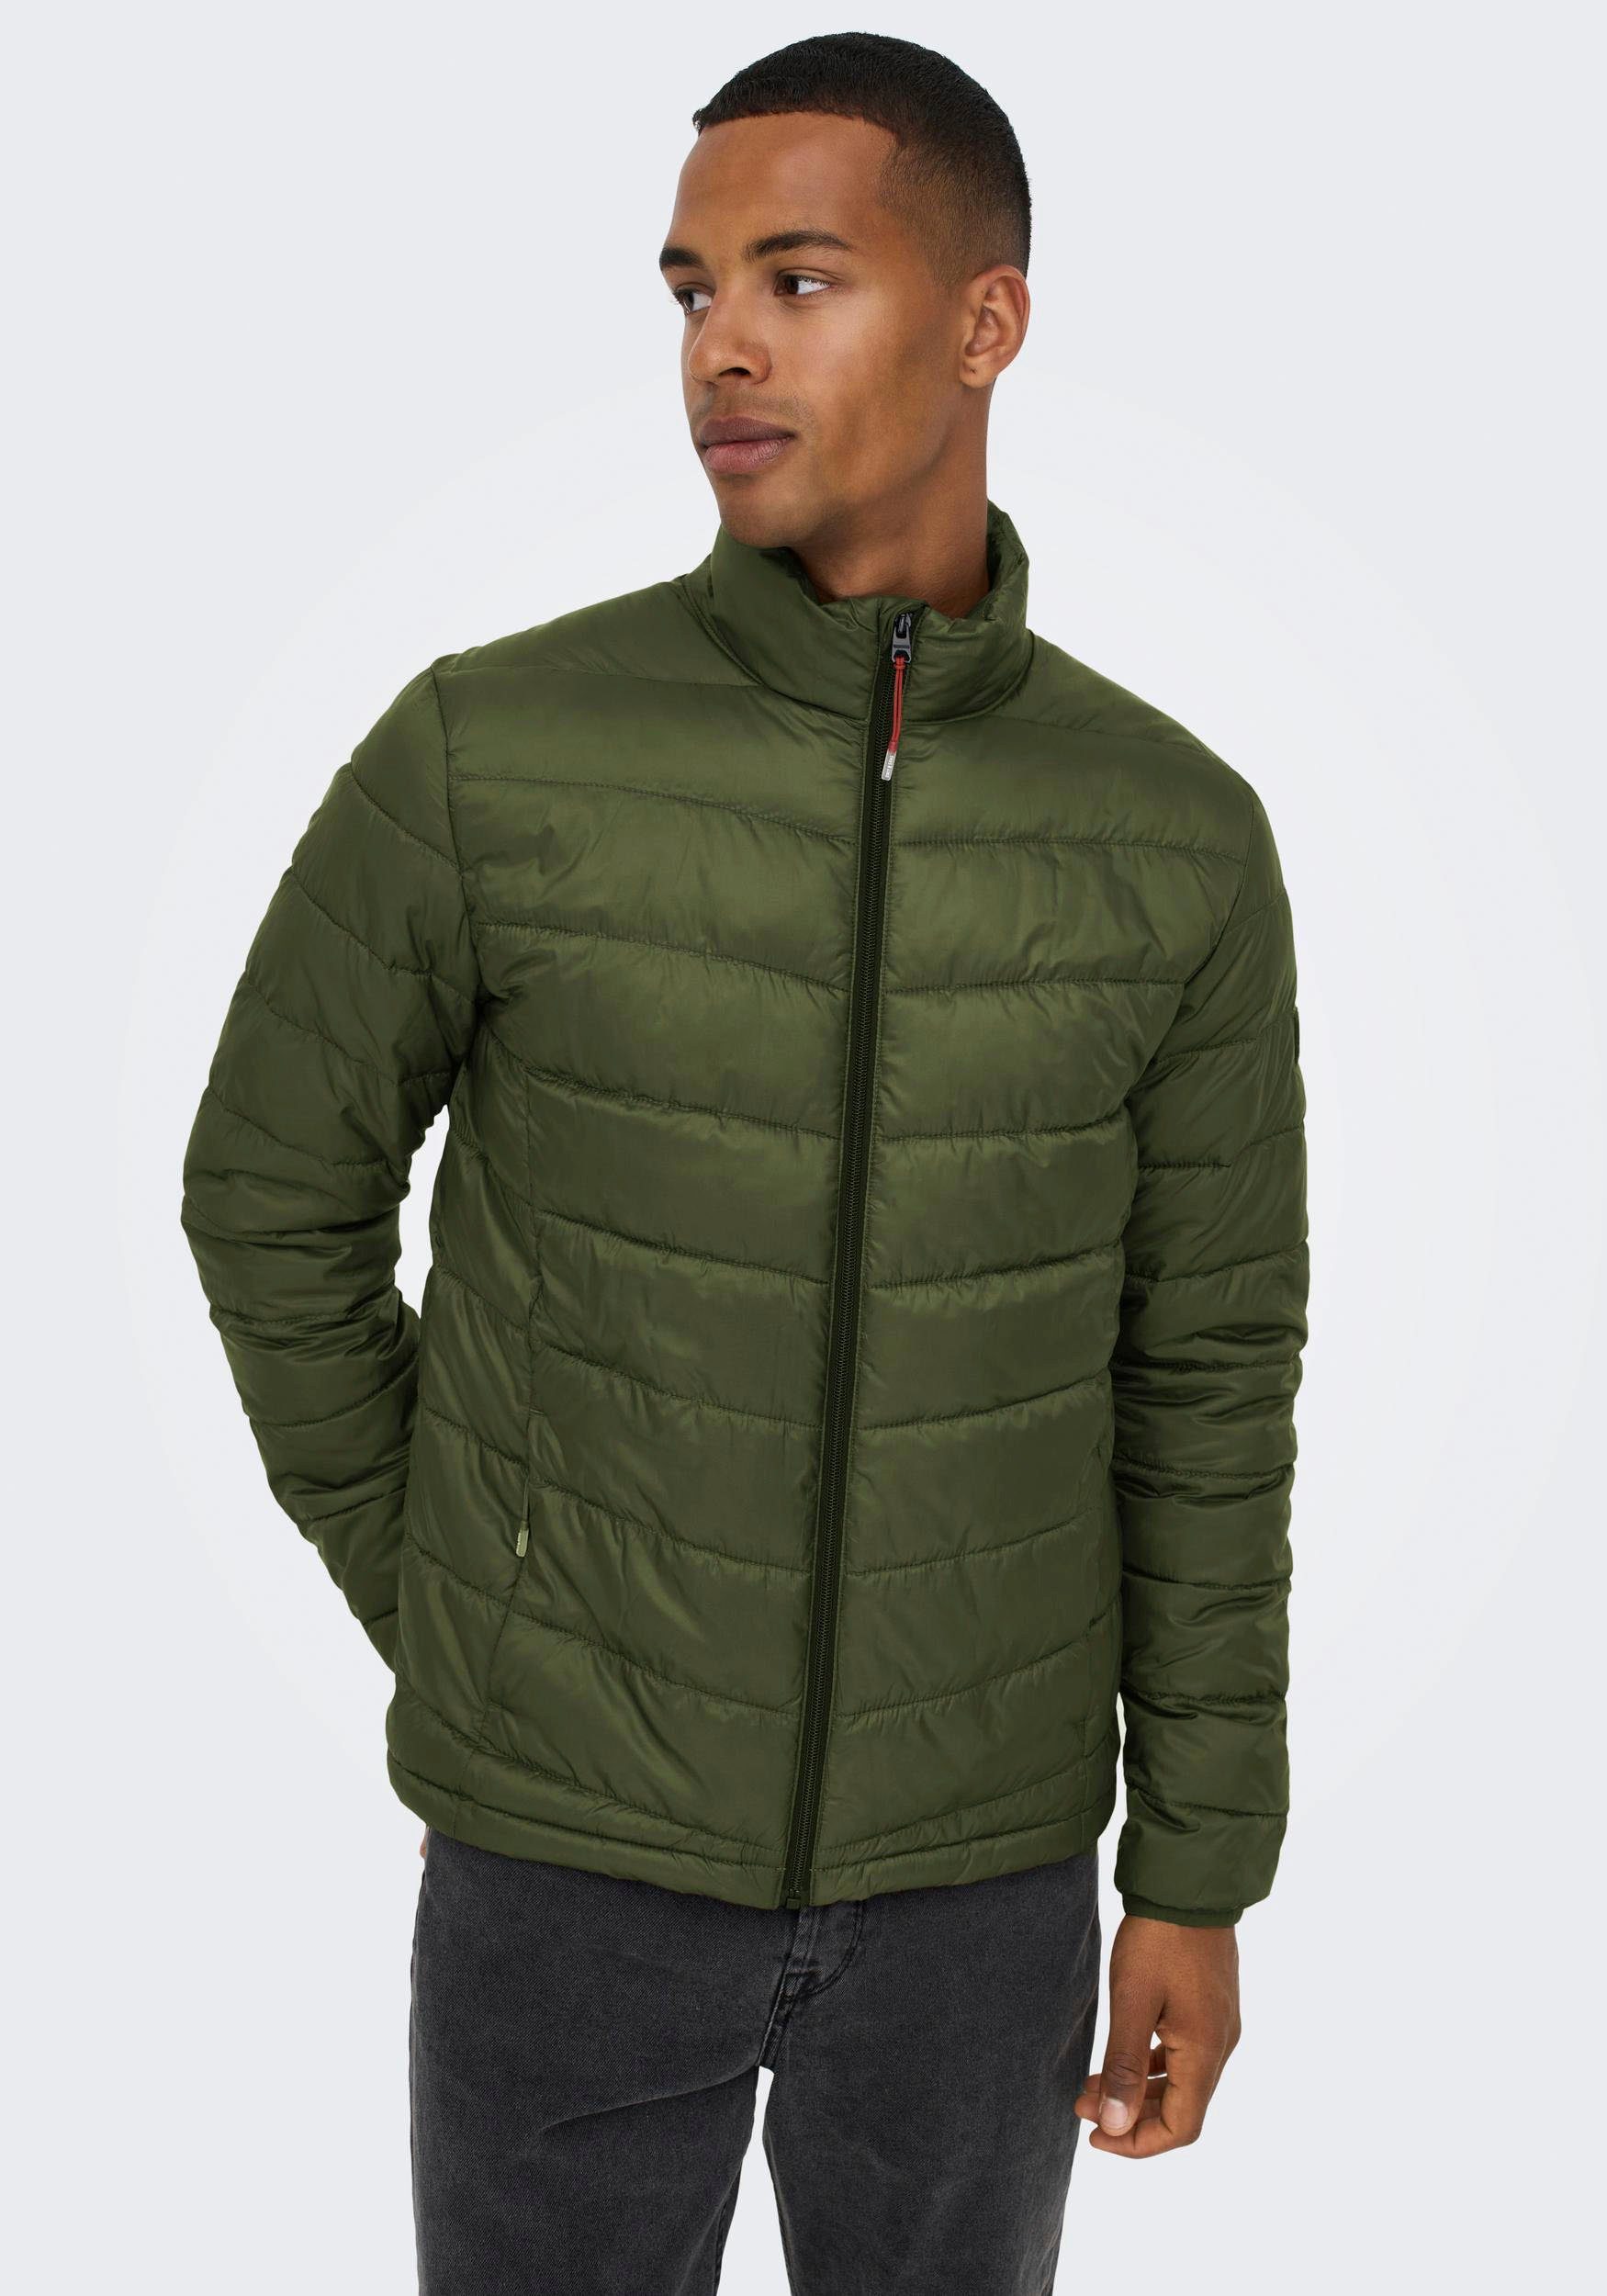 & PUFFER mit ONLY Steppjacke Olive QUILTED CARVEN Stehkragen SONS